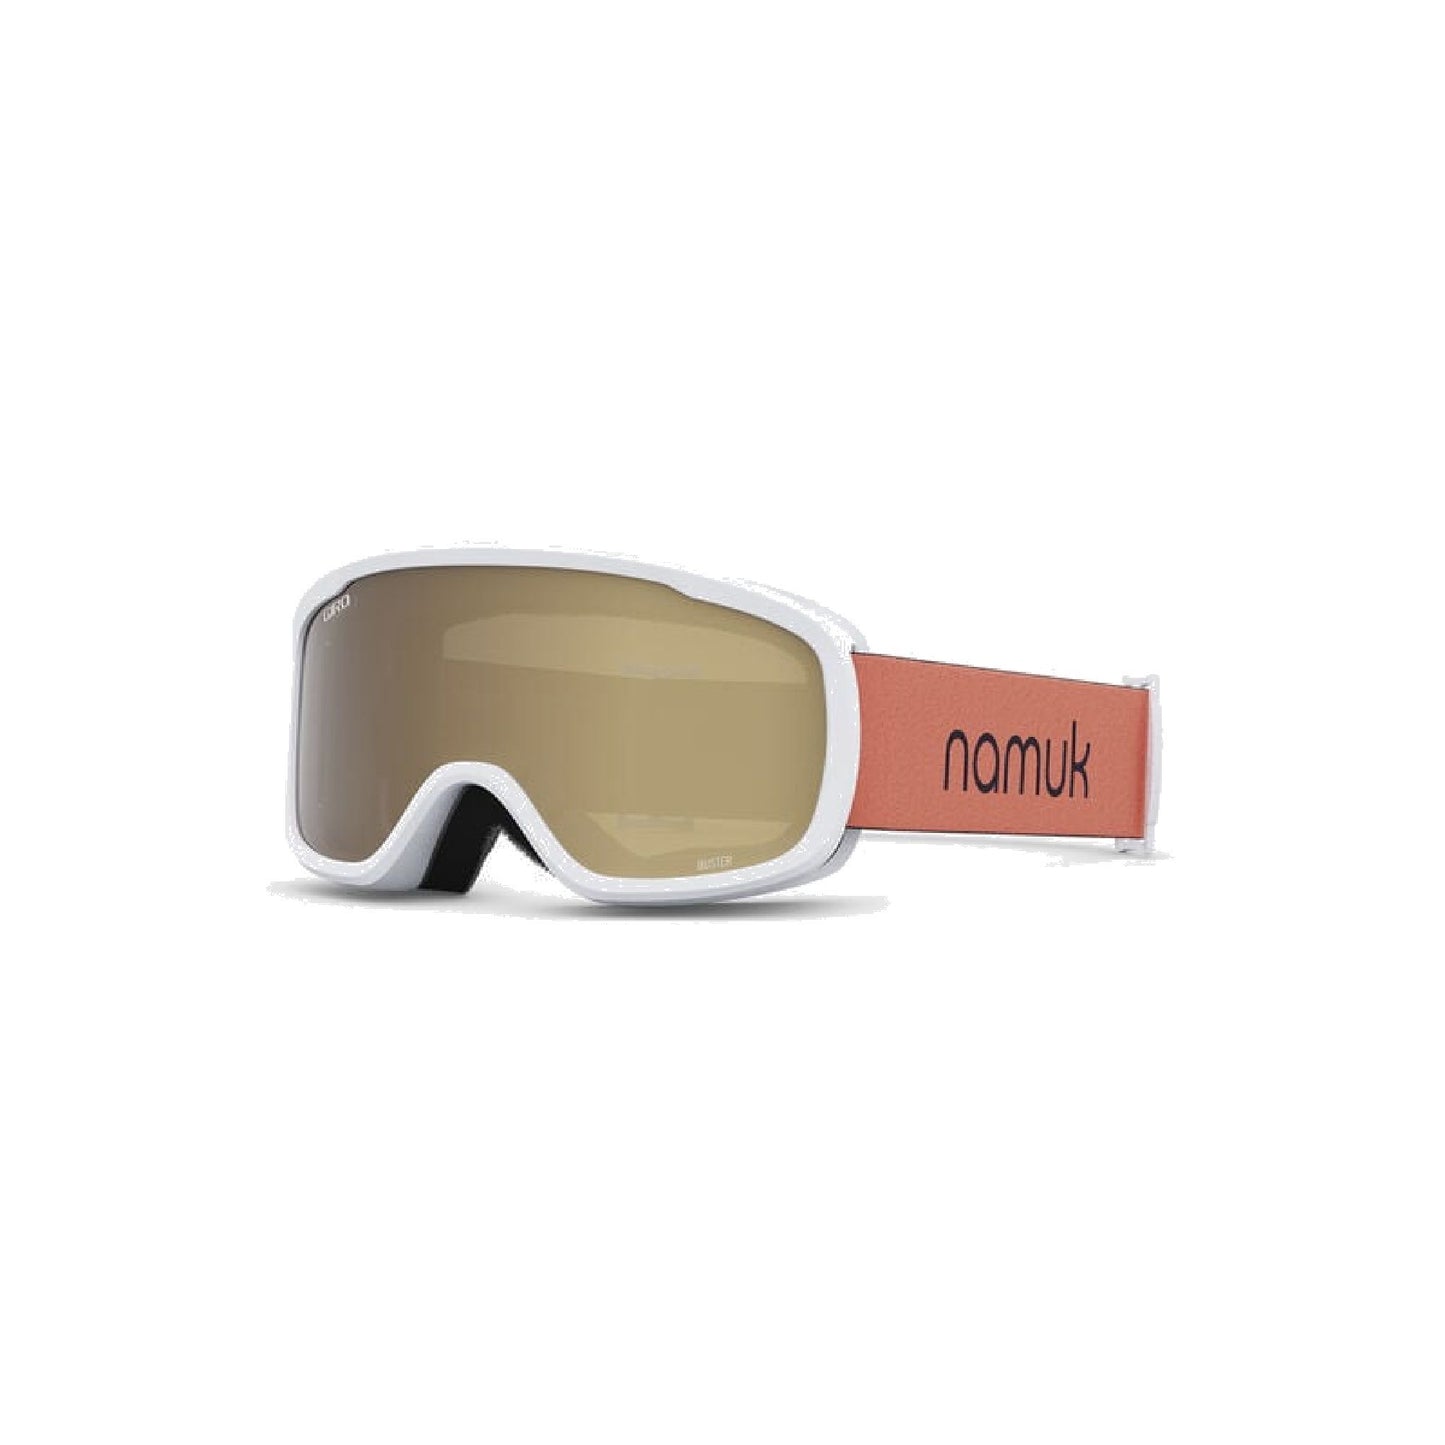 Giro Youth Buster Snow Goggles Namuk Coral/True Navy/Amber Rose Snow Goggles